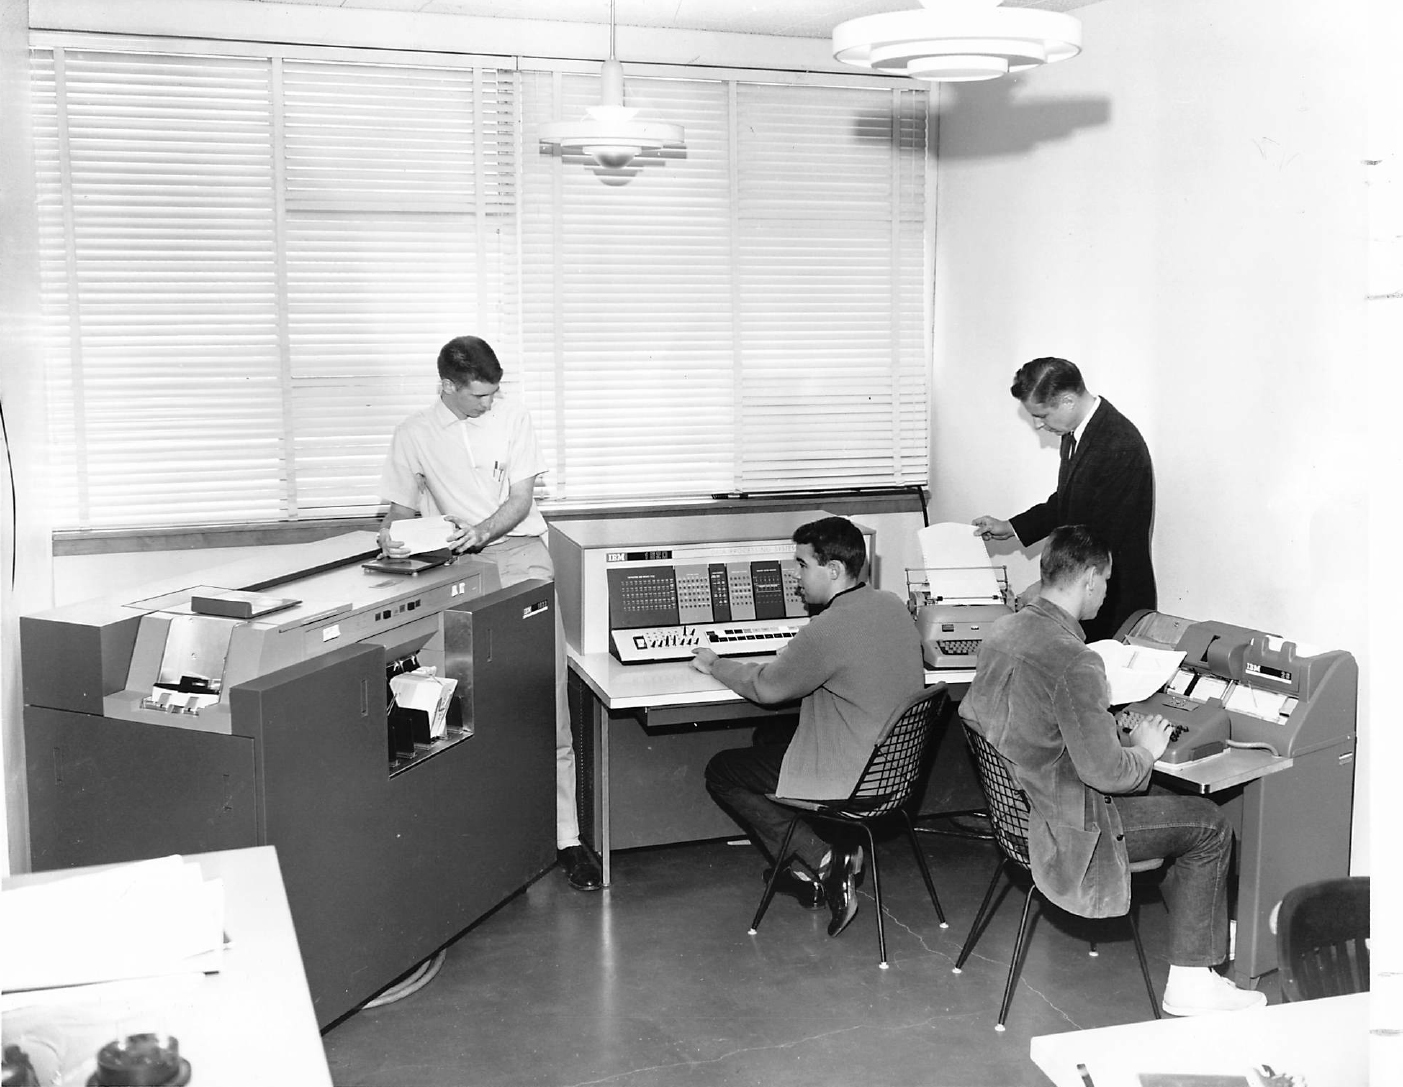 In a black and white photo, four students work on various (now vintage) computation machines.